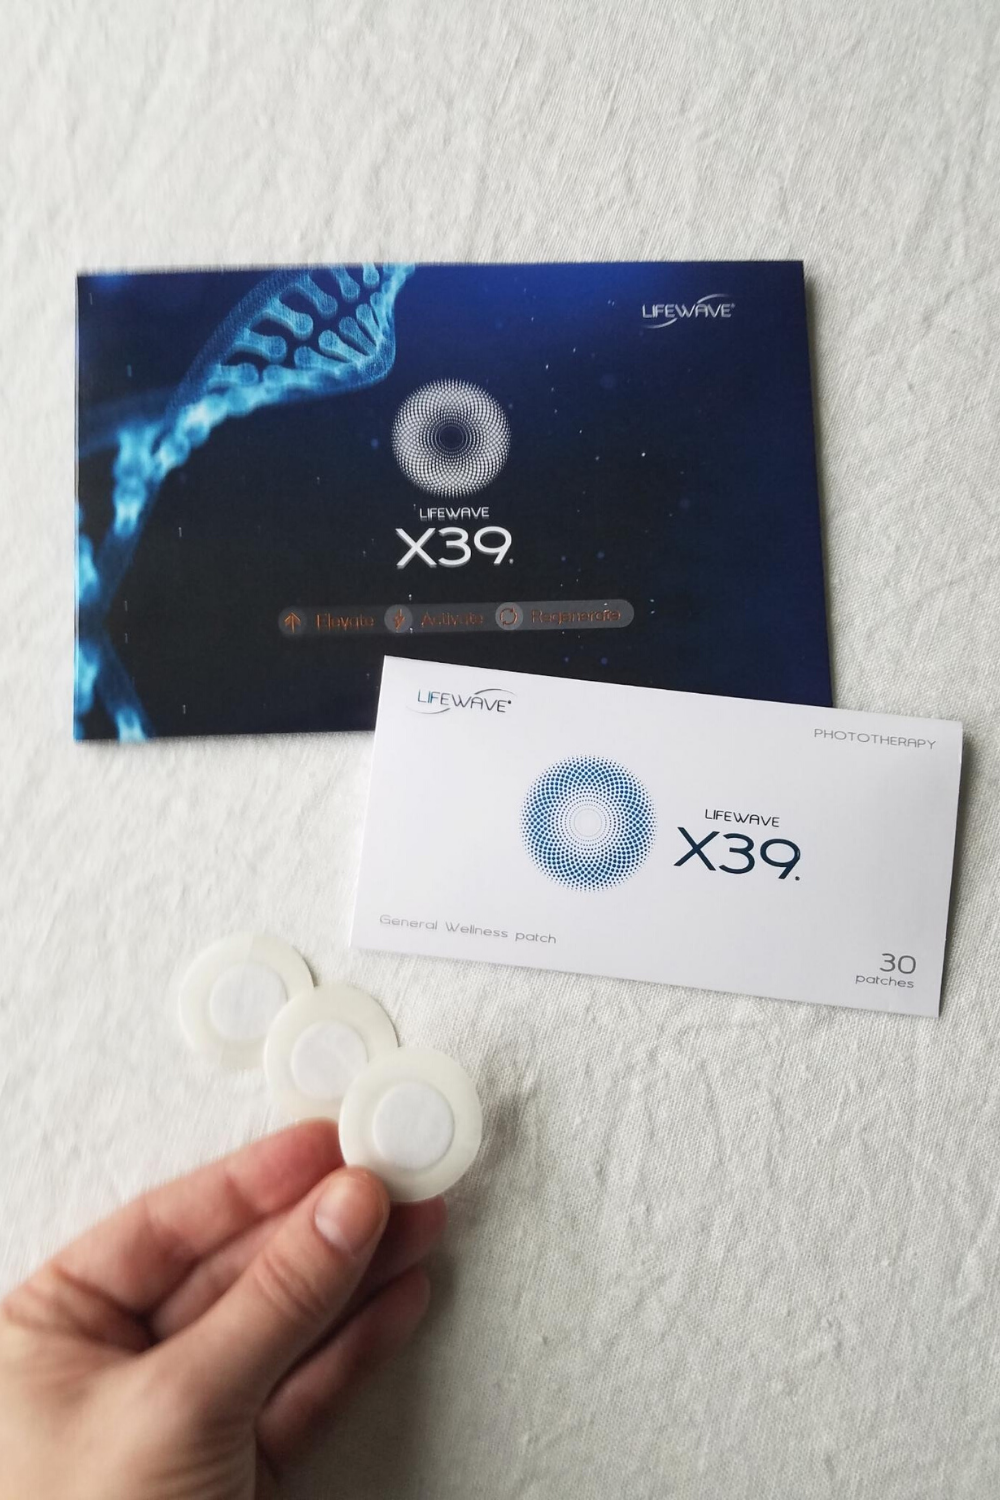 X39 LifeWave Patches for Activating Stem Cells with Light Therapy